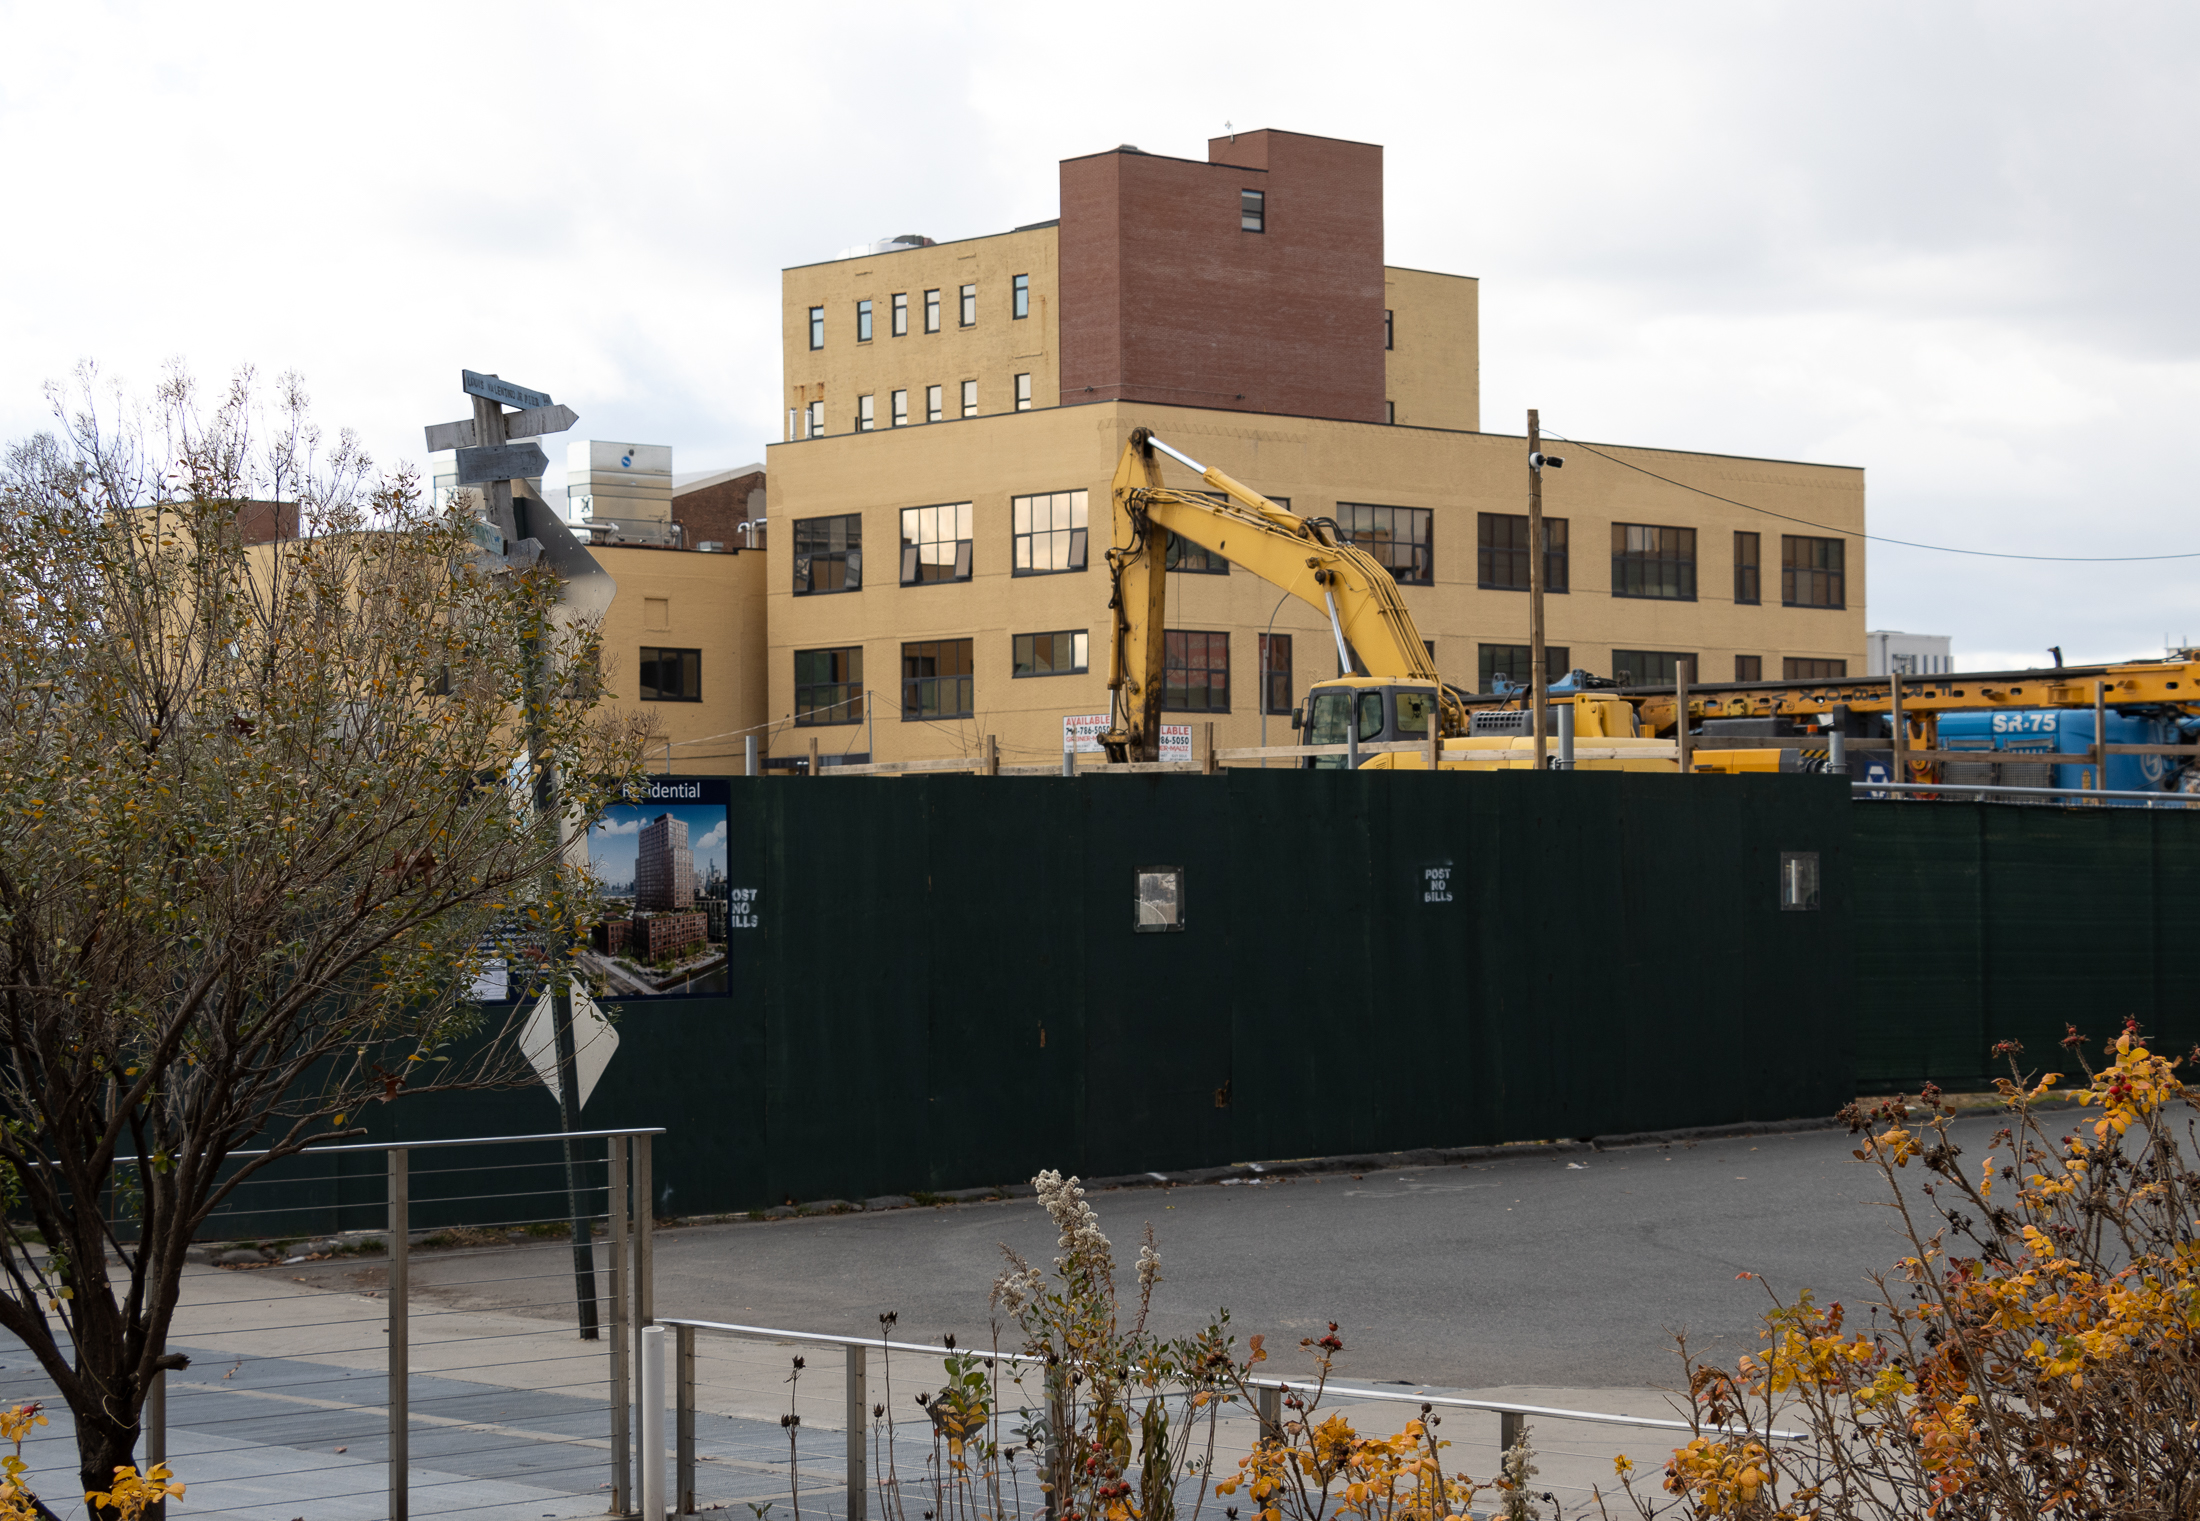 construction fence with a rendering and yellow brick buildings behind it